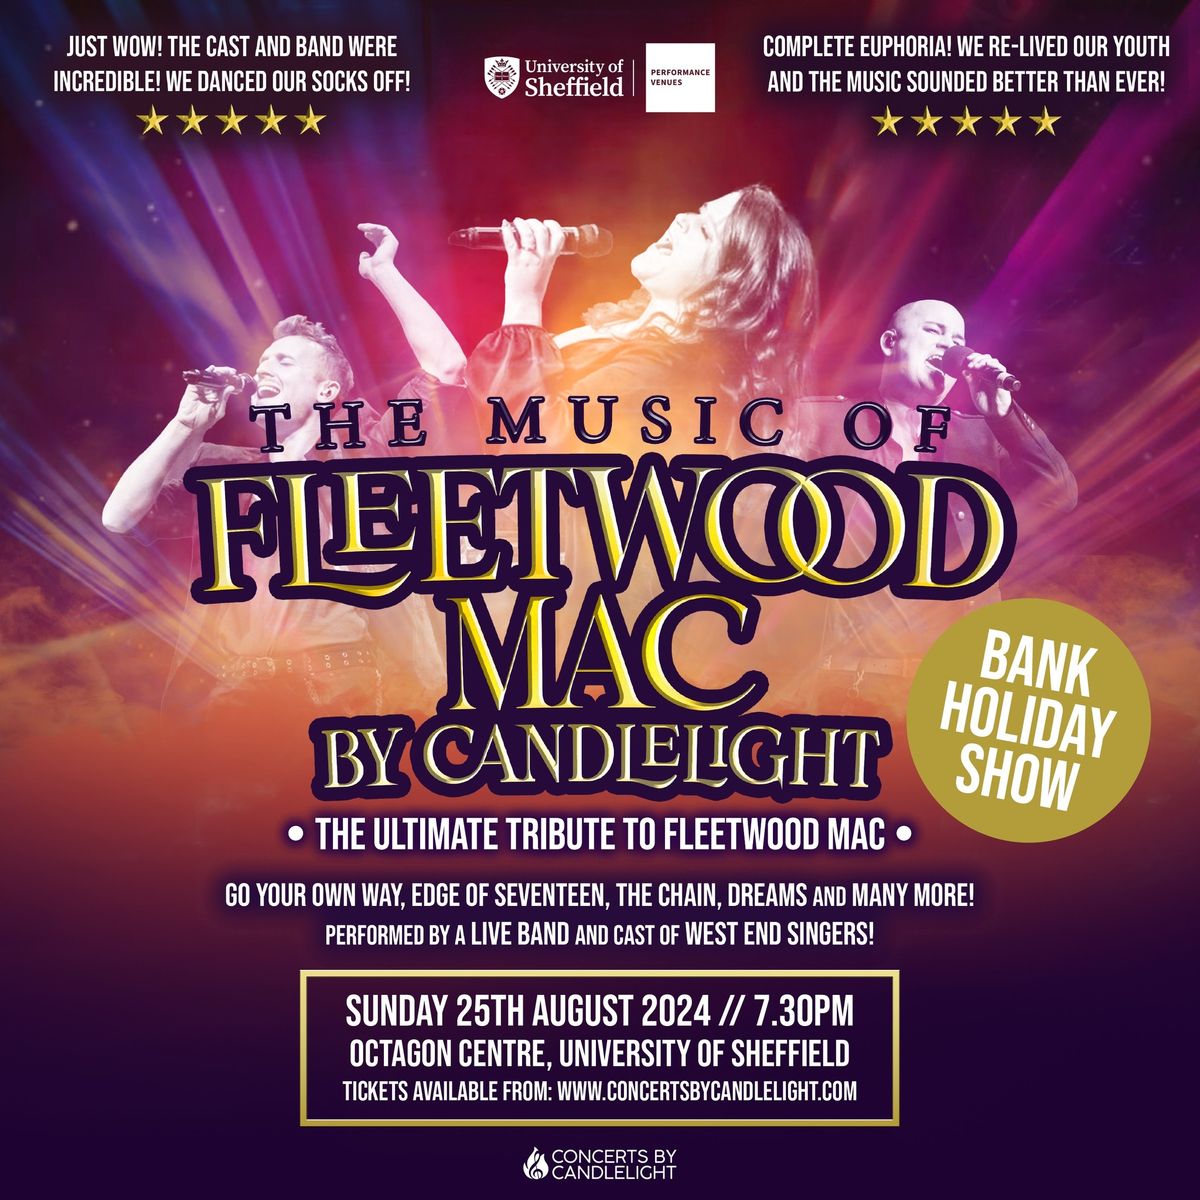 The Music Of Fleetwood Mac By Candlelight At The Octagon Centre, University Of Sheffield